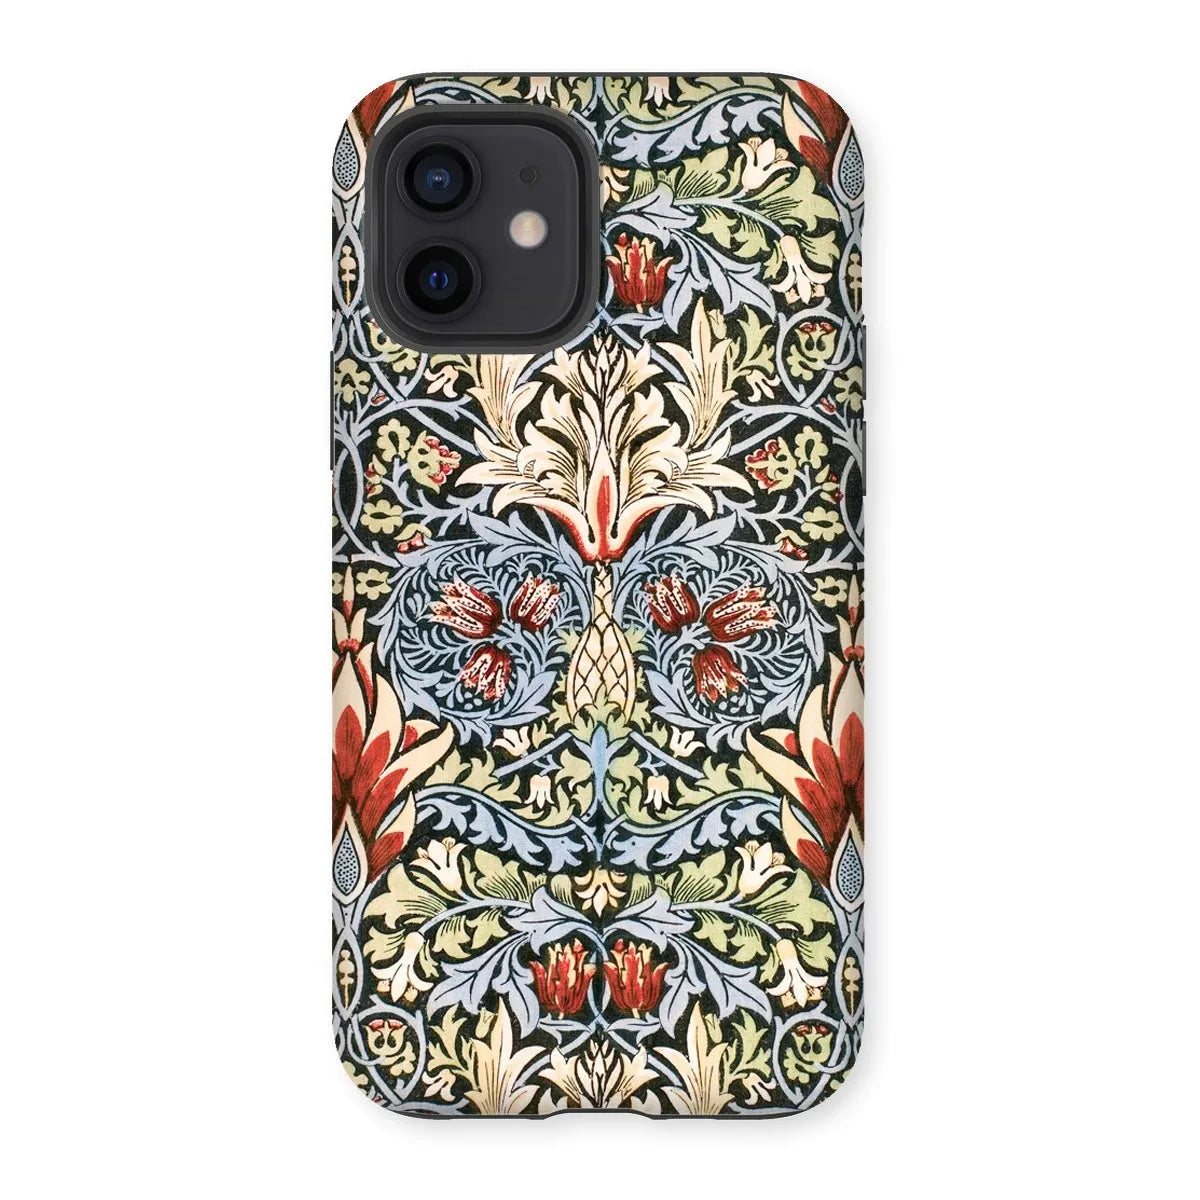 Snakeshead - Arts And Crafts Pattern Phone Case - William Morris - Iphone 12 / Matte - Mobile Phone Cases - Aesthetic